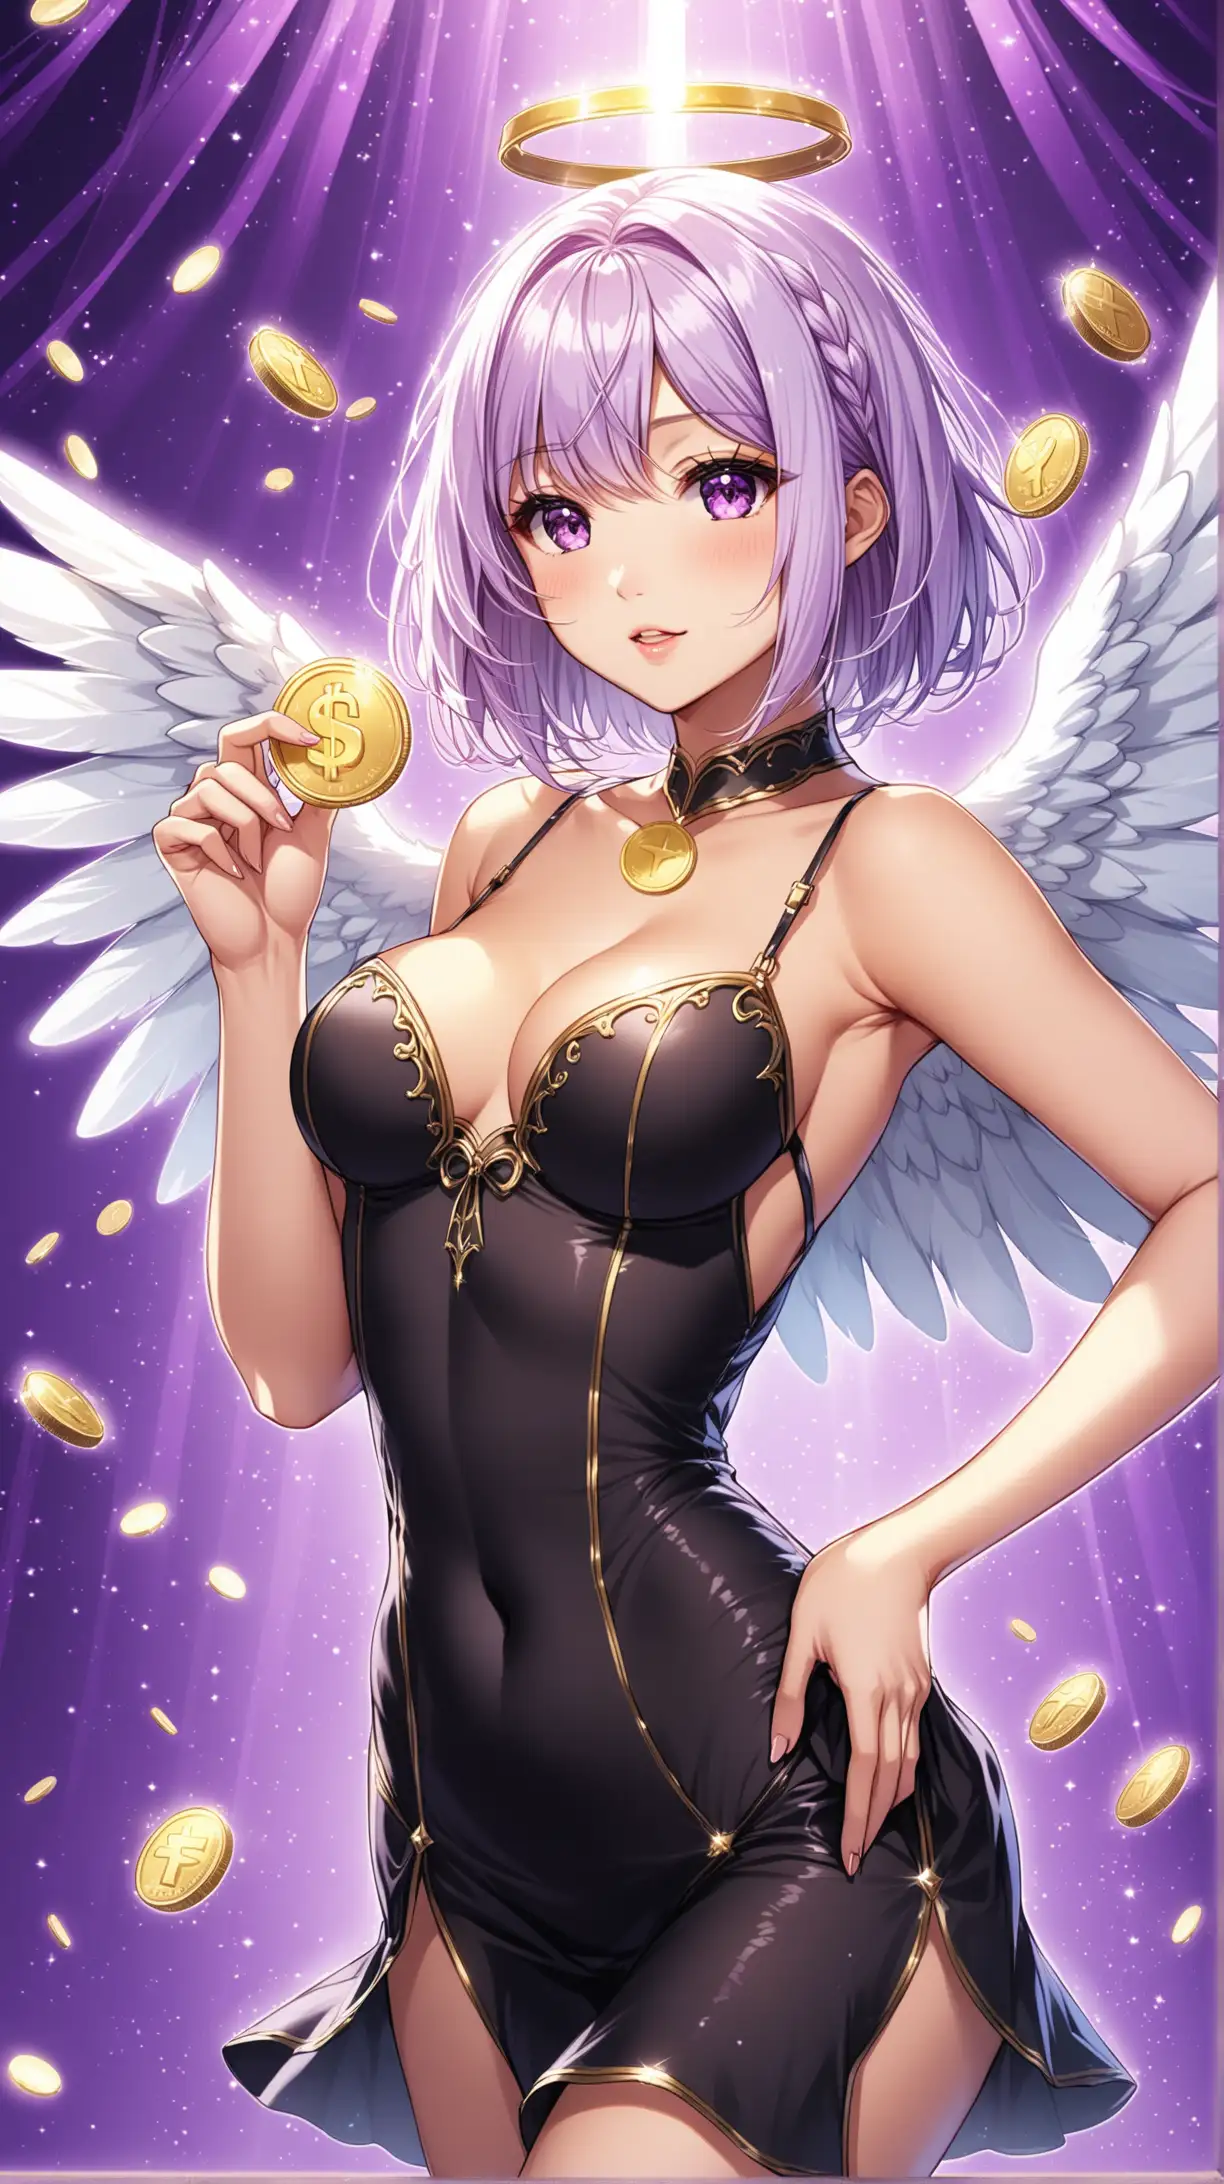 Seductive Women in Angel Costumes Playfully Carrying Coins